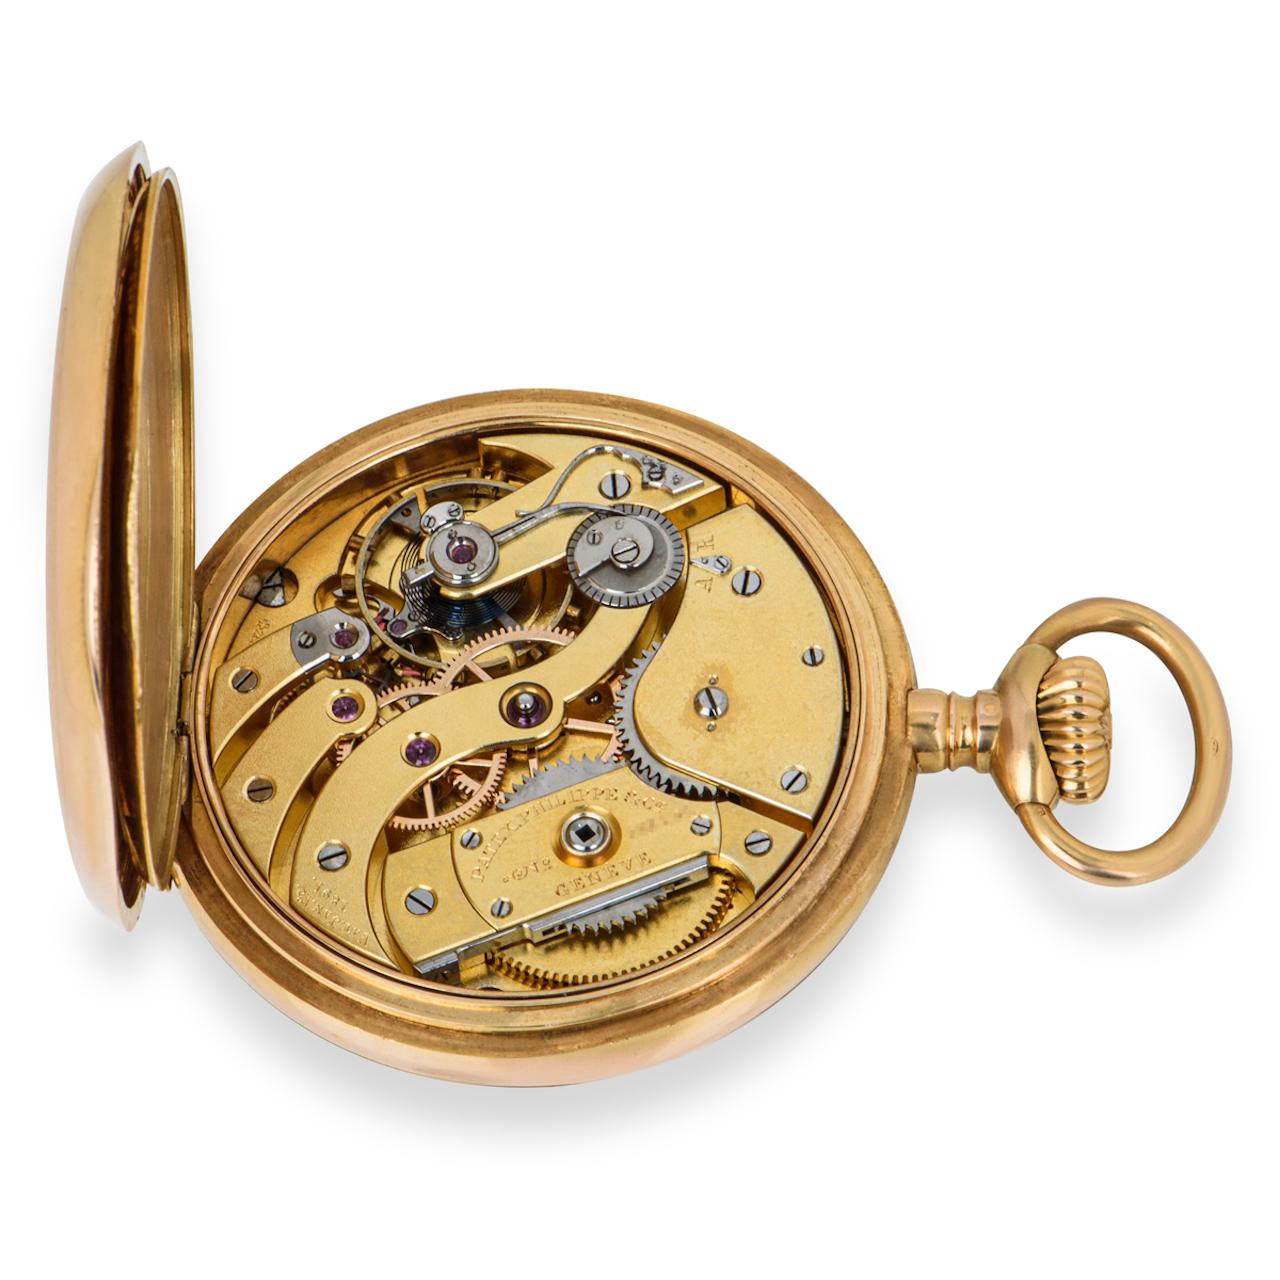 A Patek Philippe 18ct rose gold, keyless lever Gondolo open face pocket watch, 1904.

Dial: A perfect white enamel Roman dial signed Patek Philippe & Co Genève with sub second dial signed above Chronometro Gondolo with gold spade hands covered by a